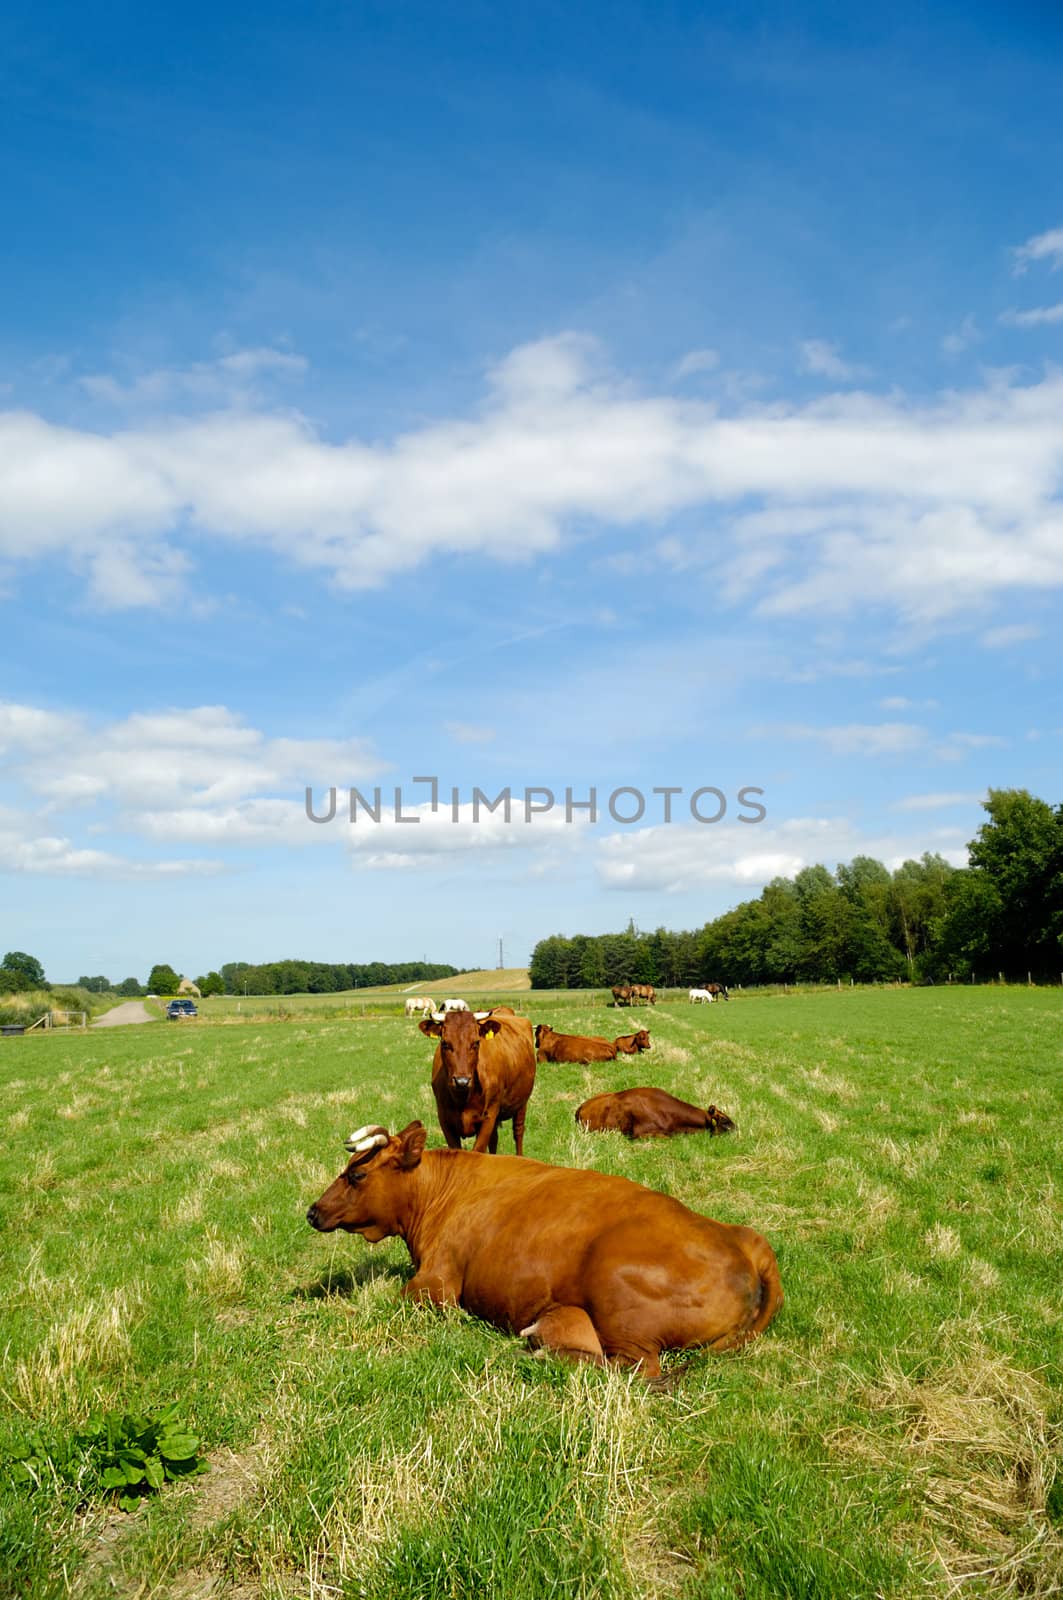 Cows are resting on green grass. The sky is blue with white clouds.